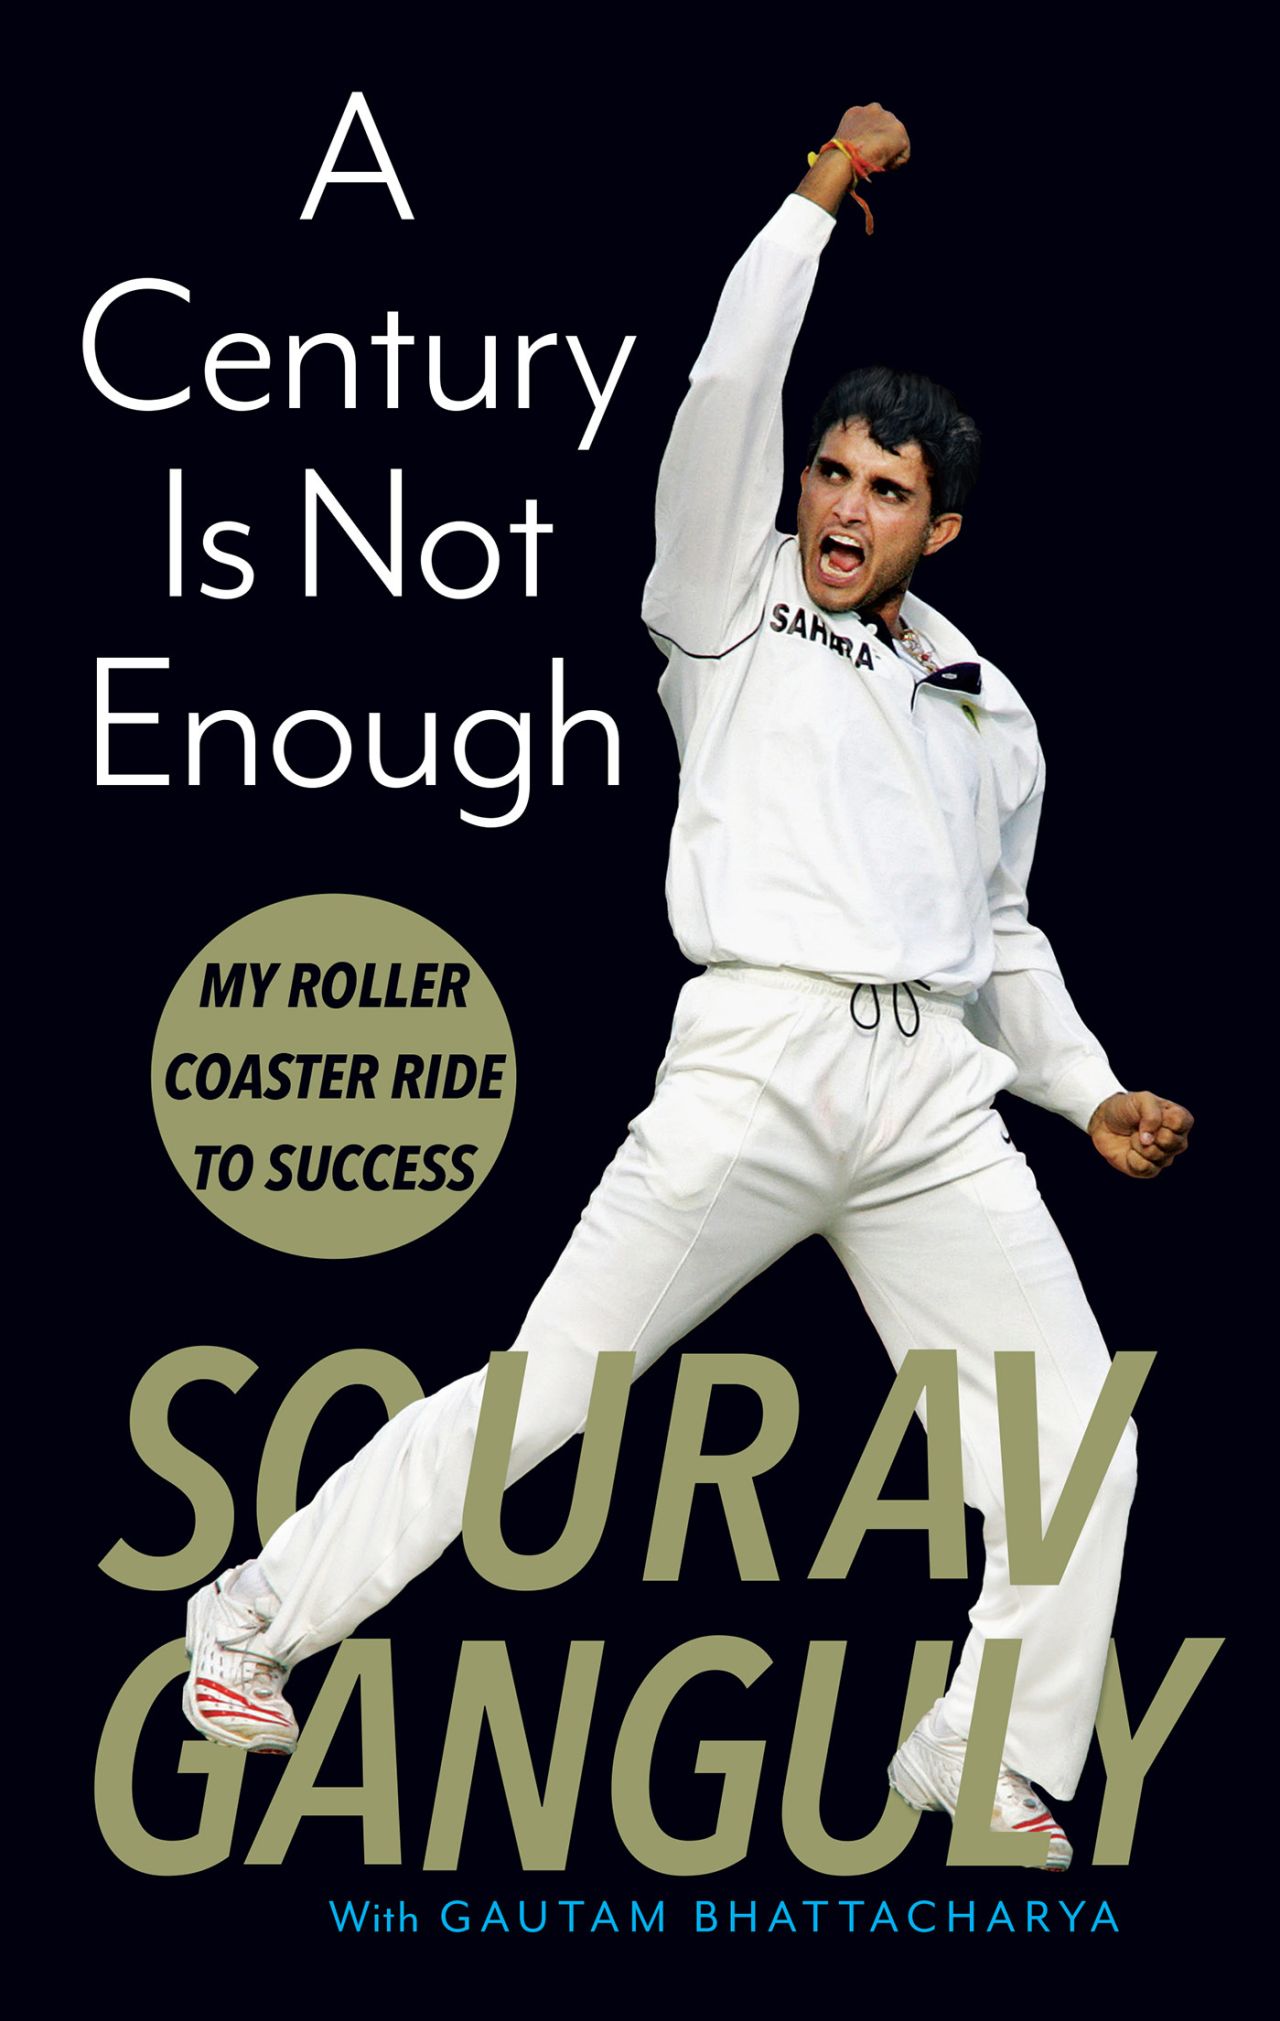 Cover of <i>A Century is Not Enough</i> by Sourav Ganguly